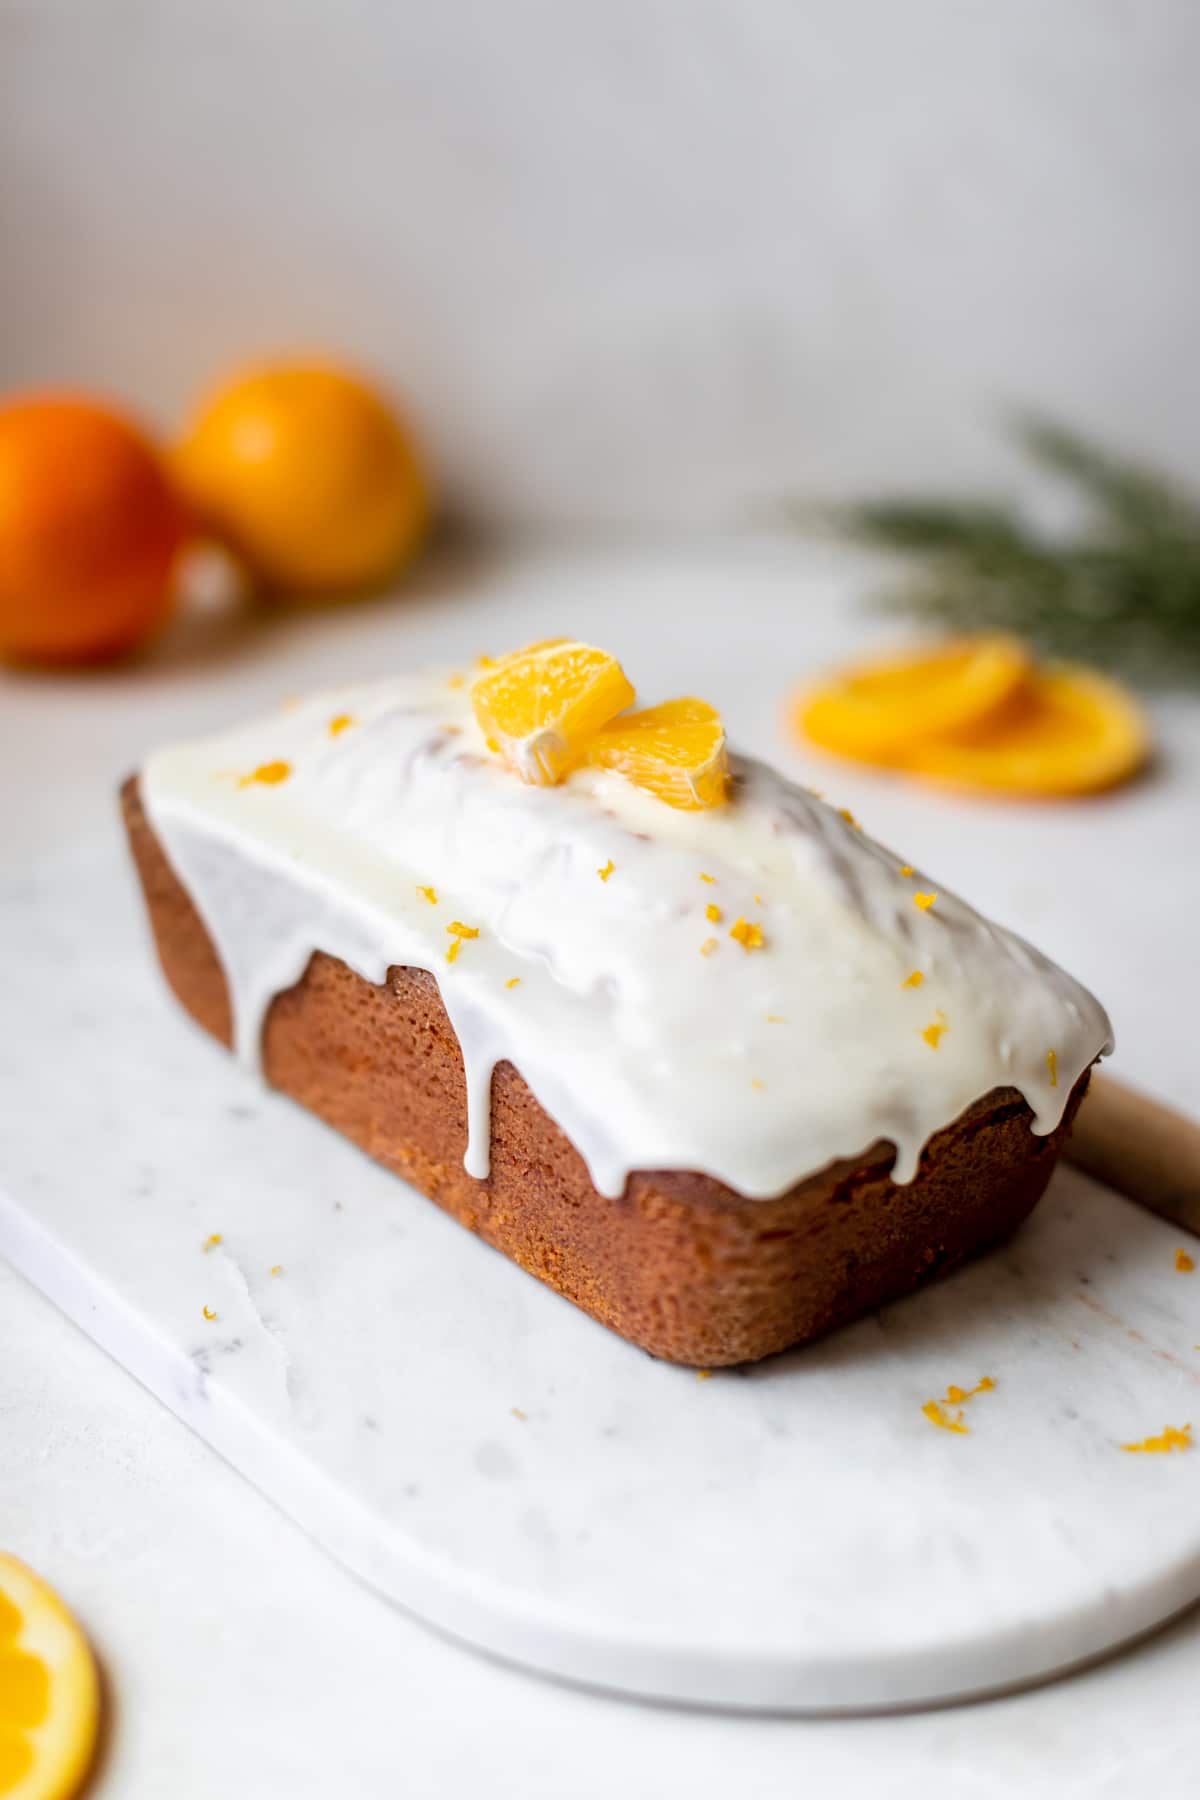 freshly baked pound cake with a glaze poured on top garnished with orange slices